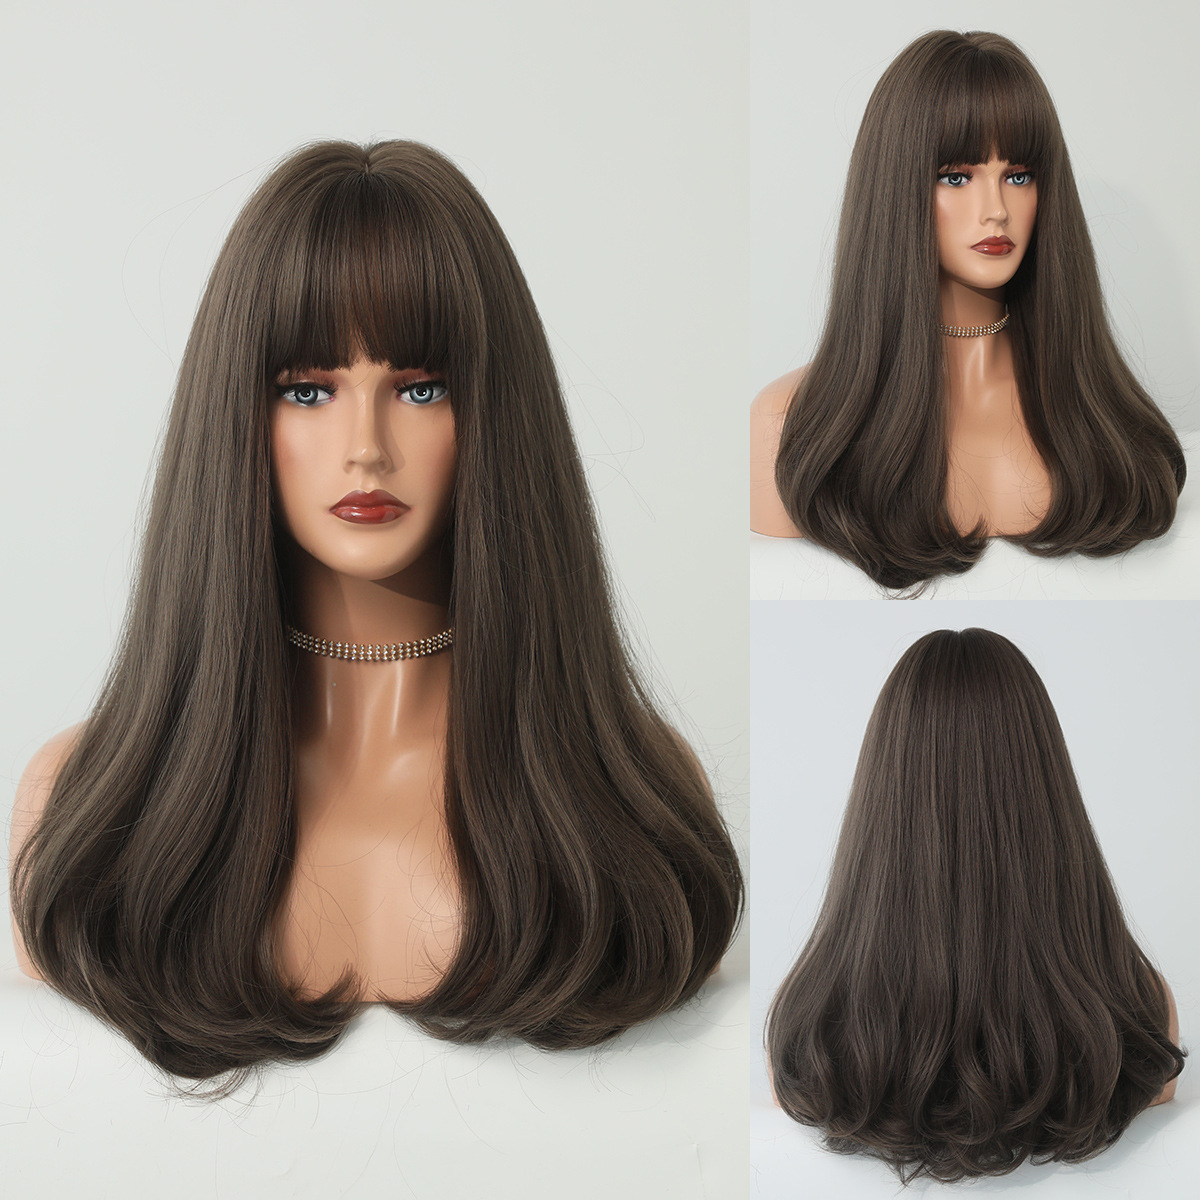 A fashionable wig set for women featuring a ready-to-go platinum blonde long curly wig, perfect for various occasions including Christmas